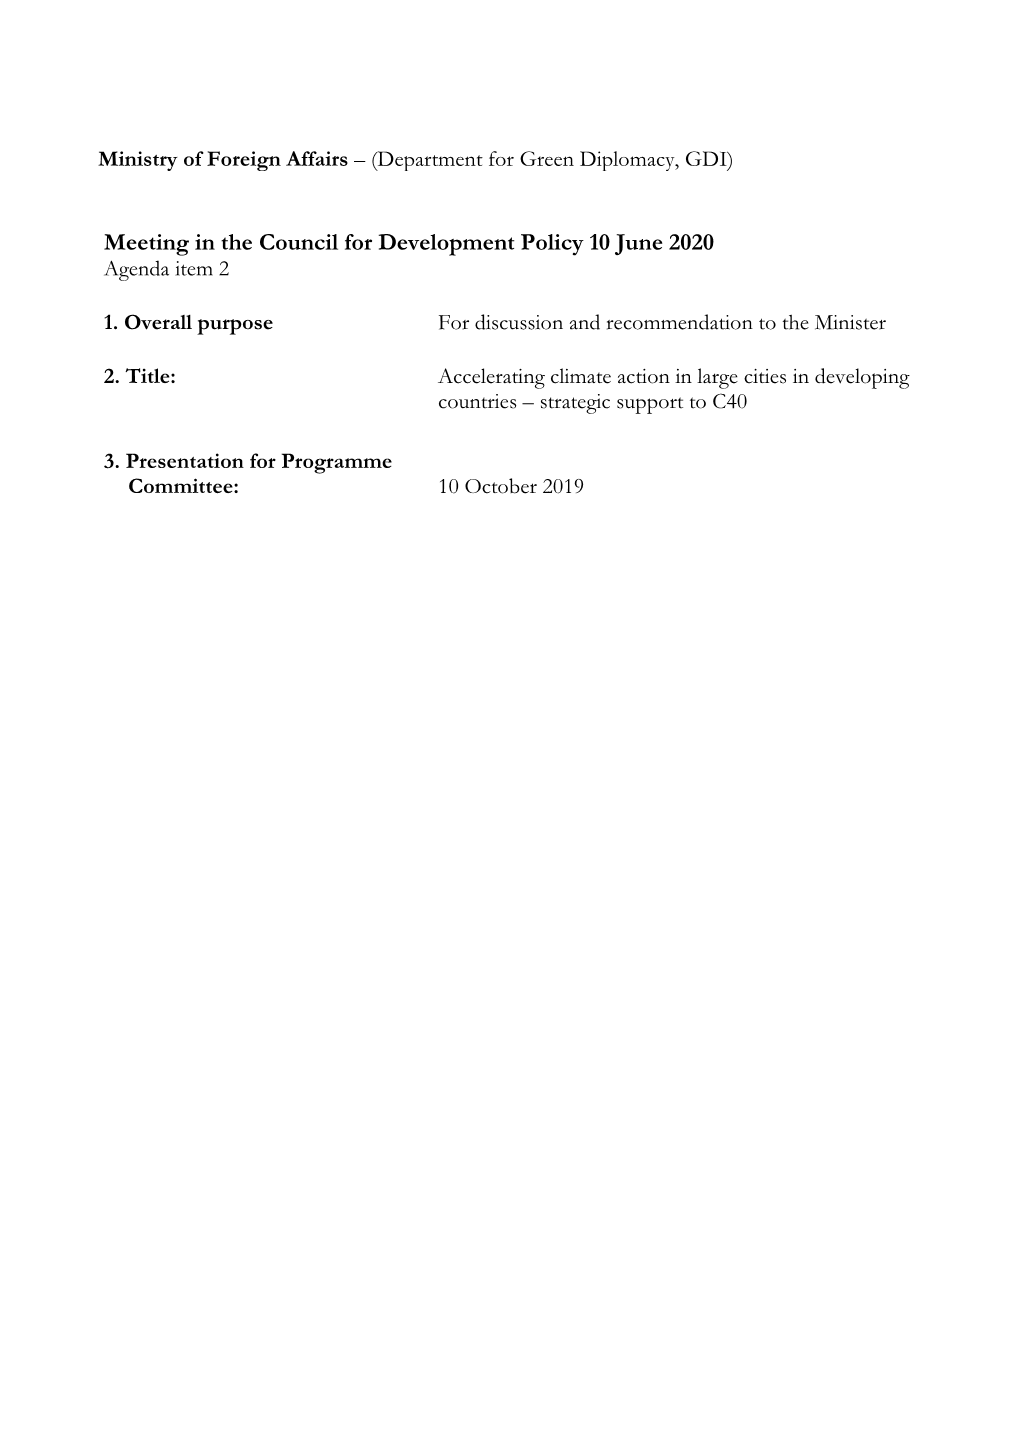 Meeting in the Council for Development Policy 10 June 2020 Agenda Item 2